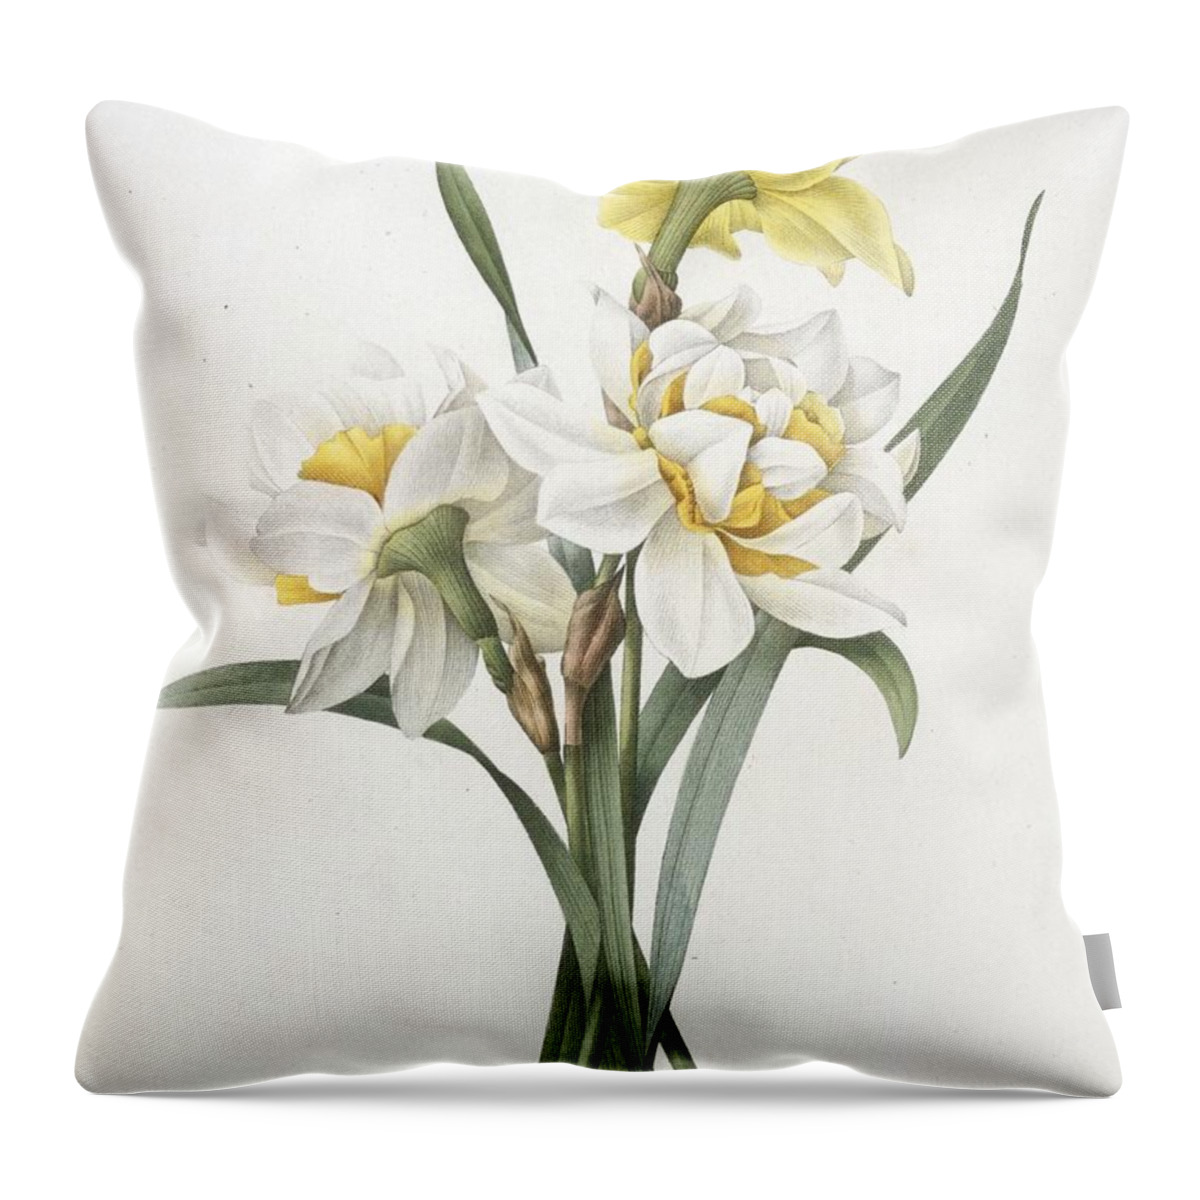 Redoute Throw Pillow featuring the painting Narcissus Gouani Double Daffodil by Pierre Joseph Redoute